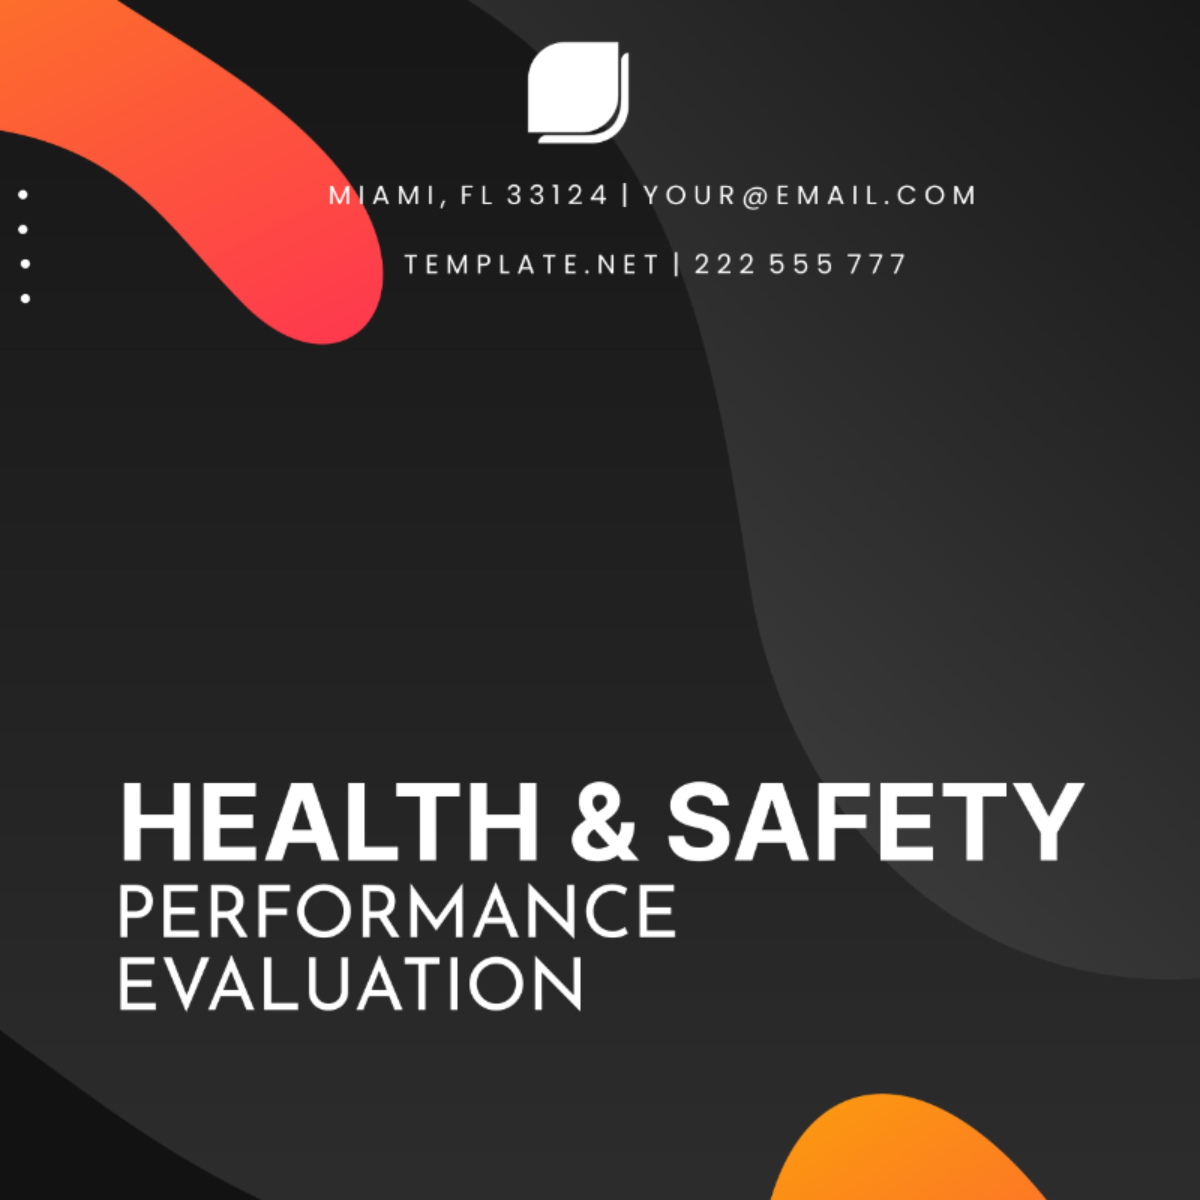 Health & Safety Committee Performance Evaluation Template